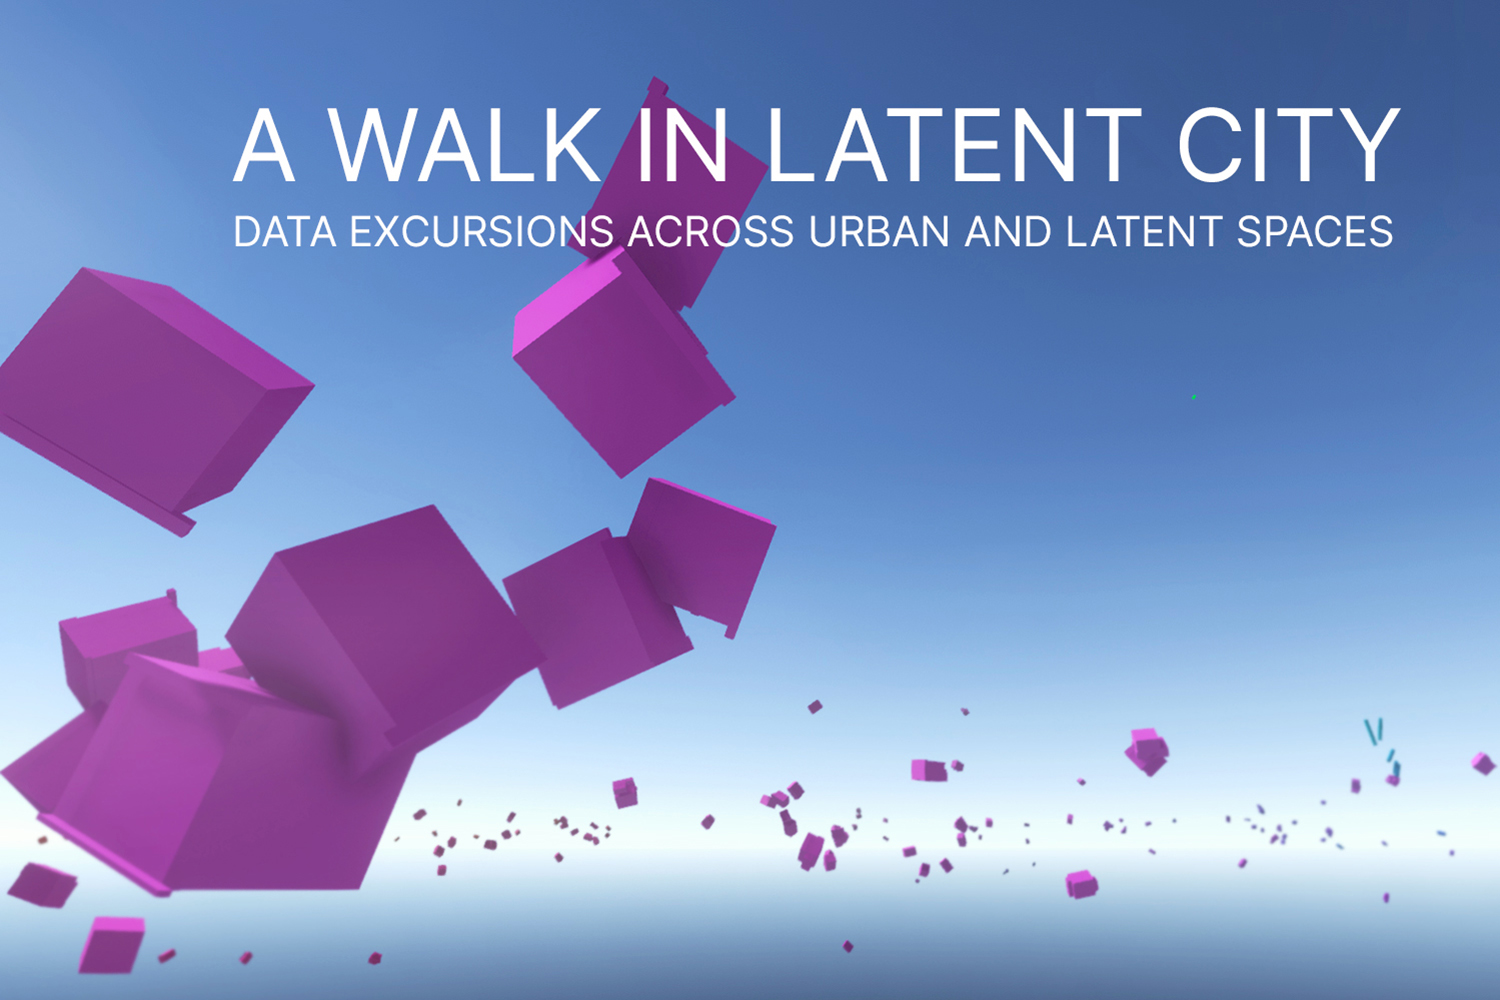 A Walk in Latent City